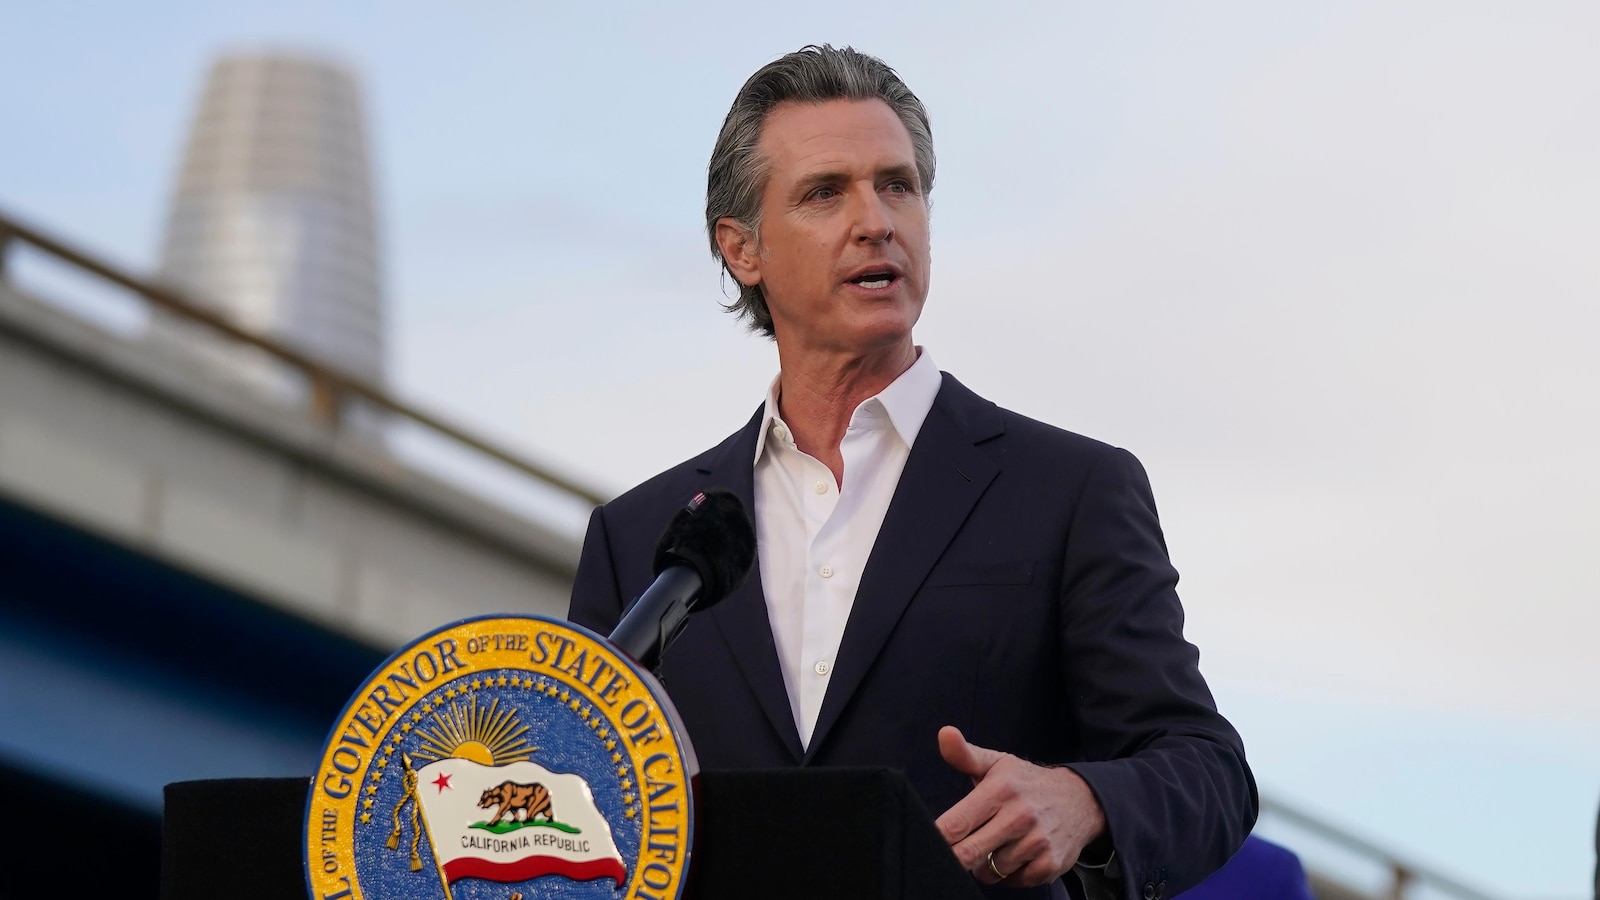 California Governor Takes Action Against Abortion Travel Bans with New Ad Campaign